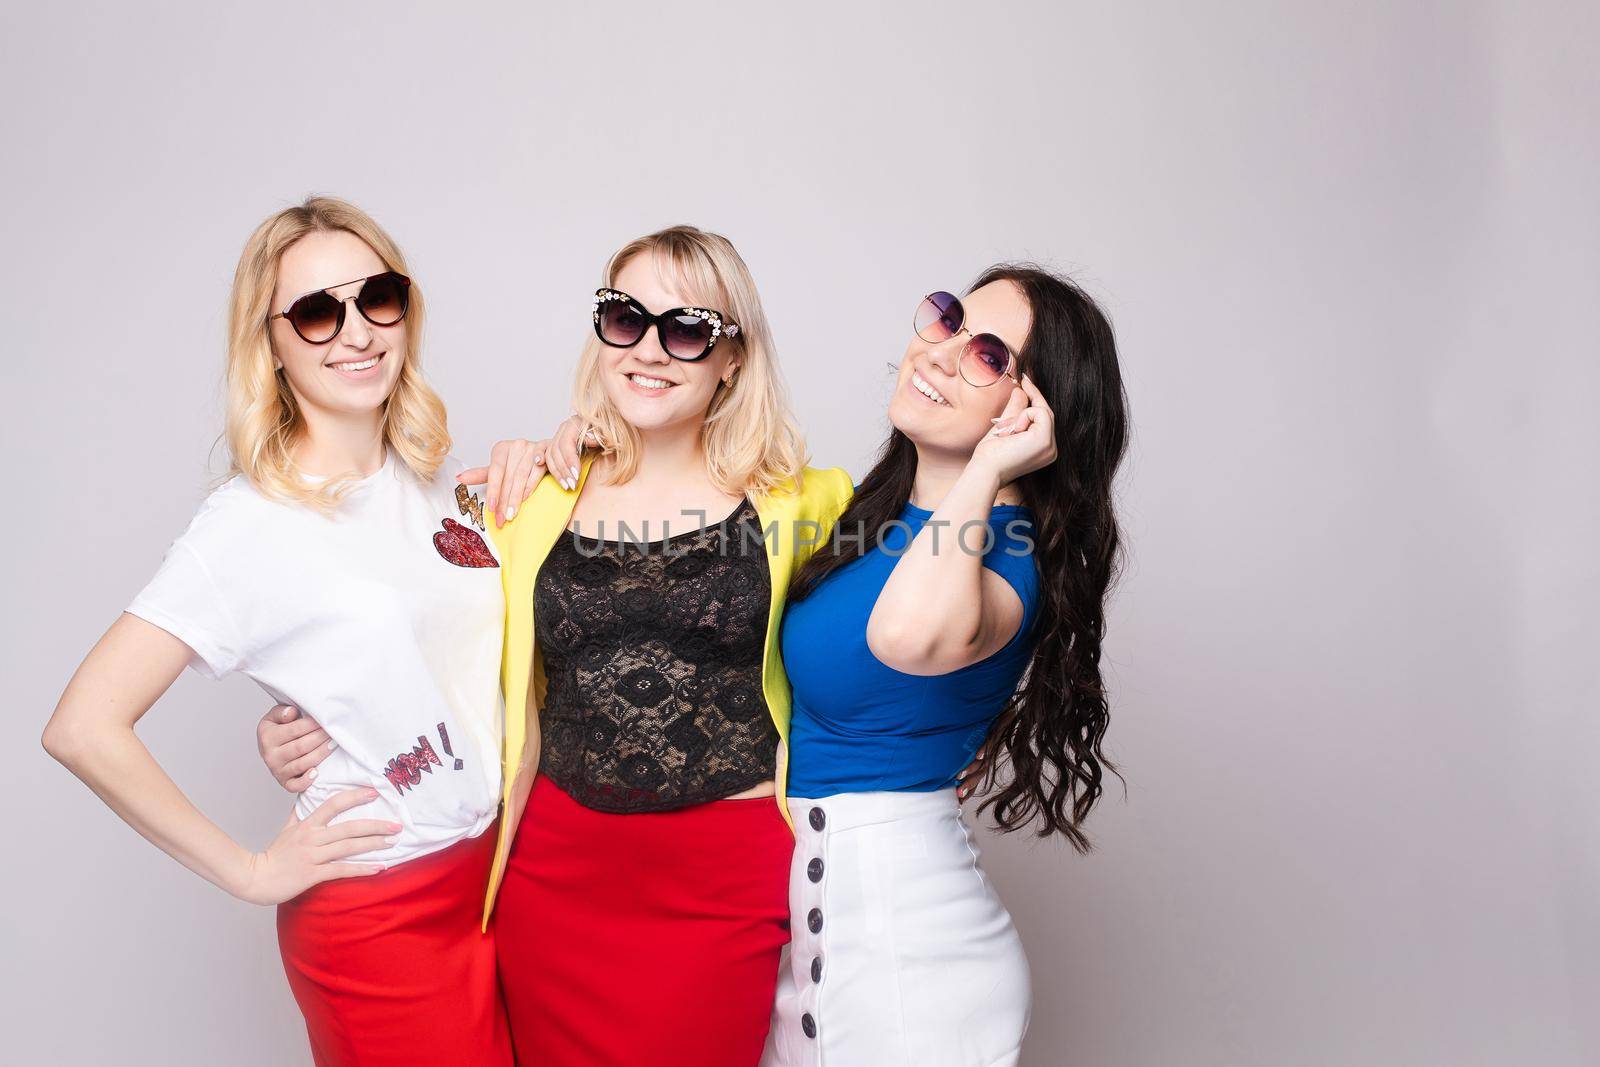 Three cheerful women wearing bright colorful skirts, shirts and glasses standing on grey isolated background. Happy girls looking at camera, laughing and showing tongue. Concept of happiness.